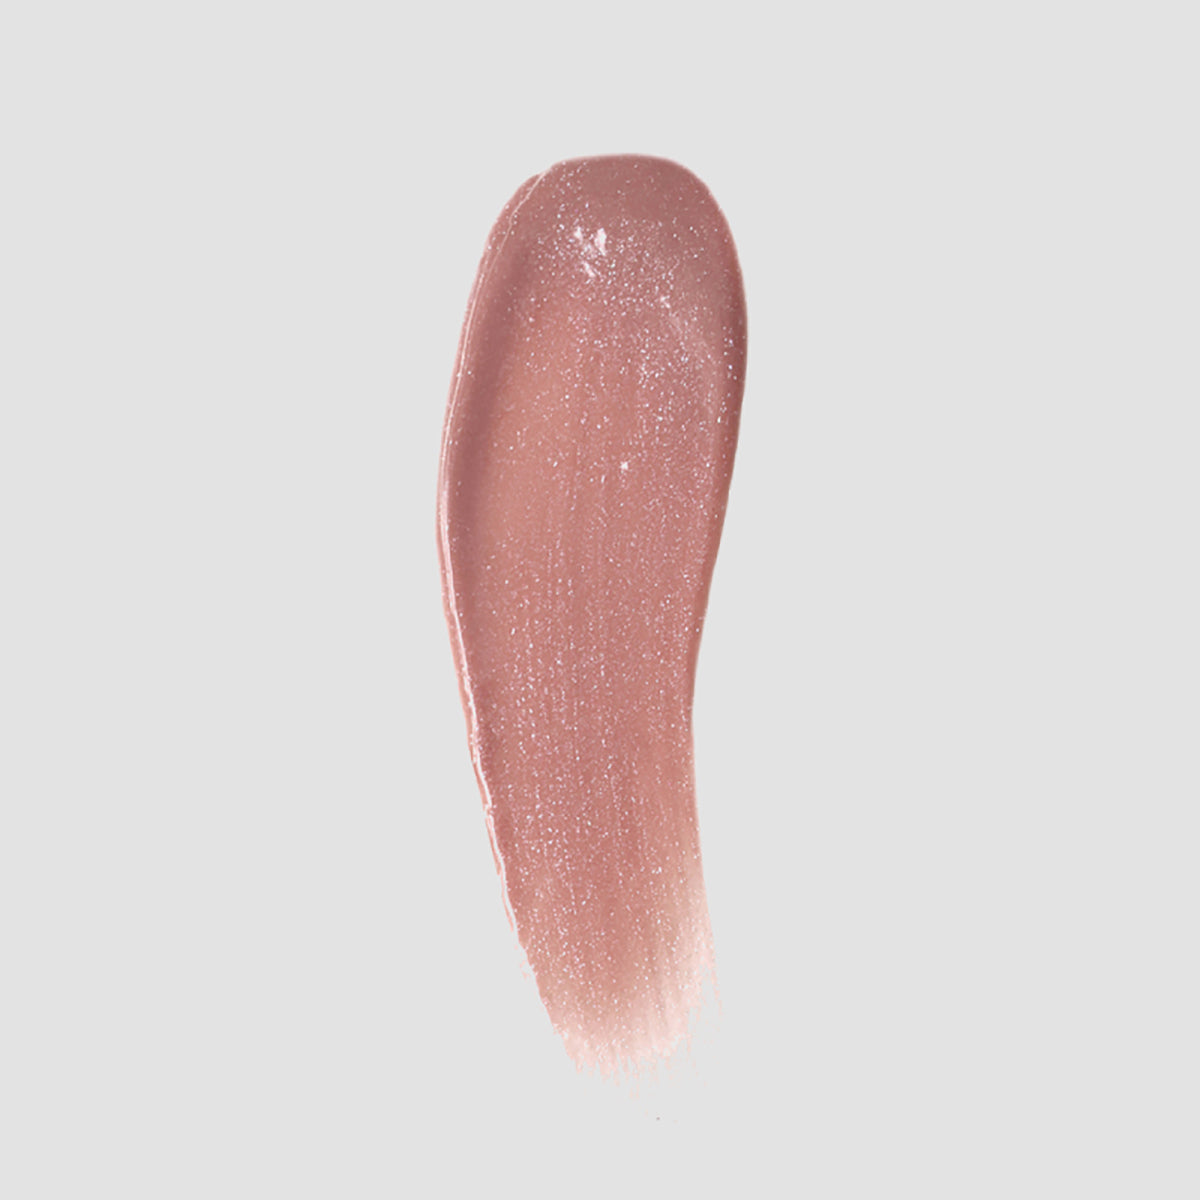 Beige frosted mini lip gloss with shimmer spread